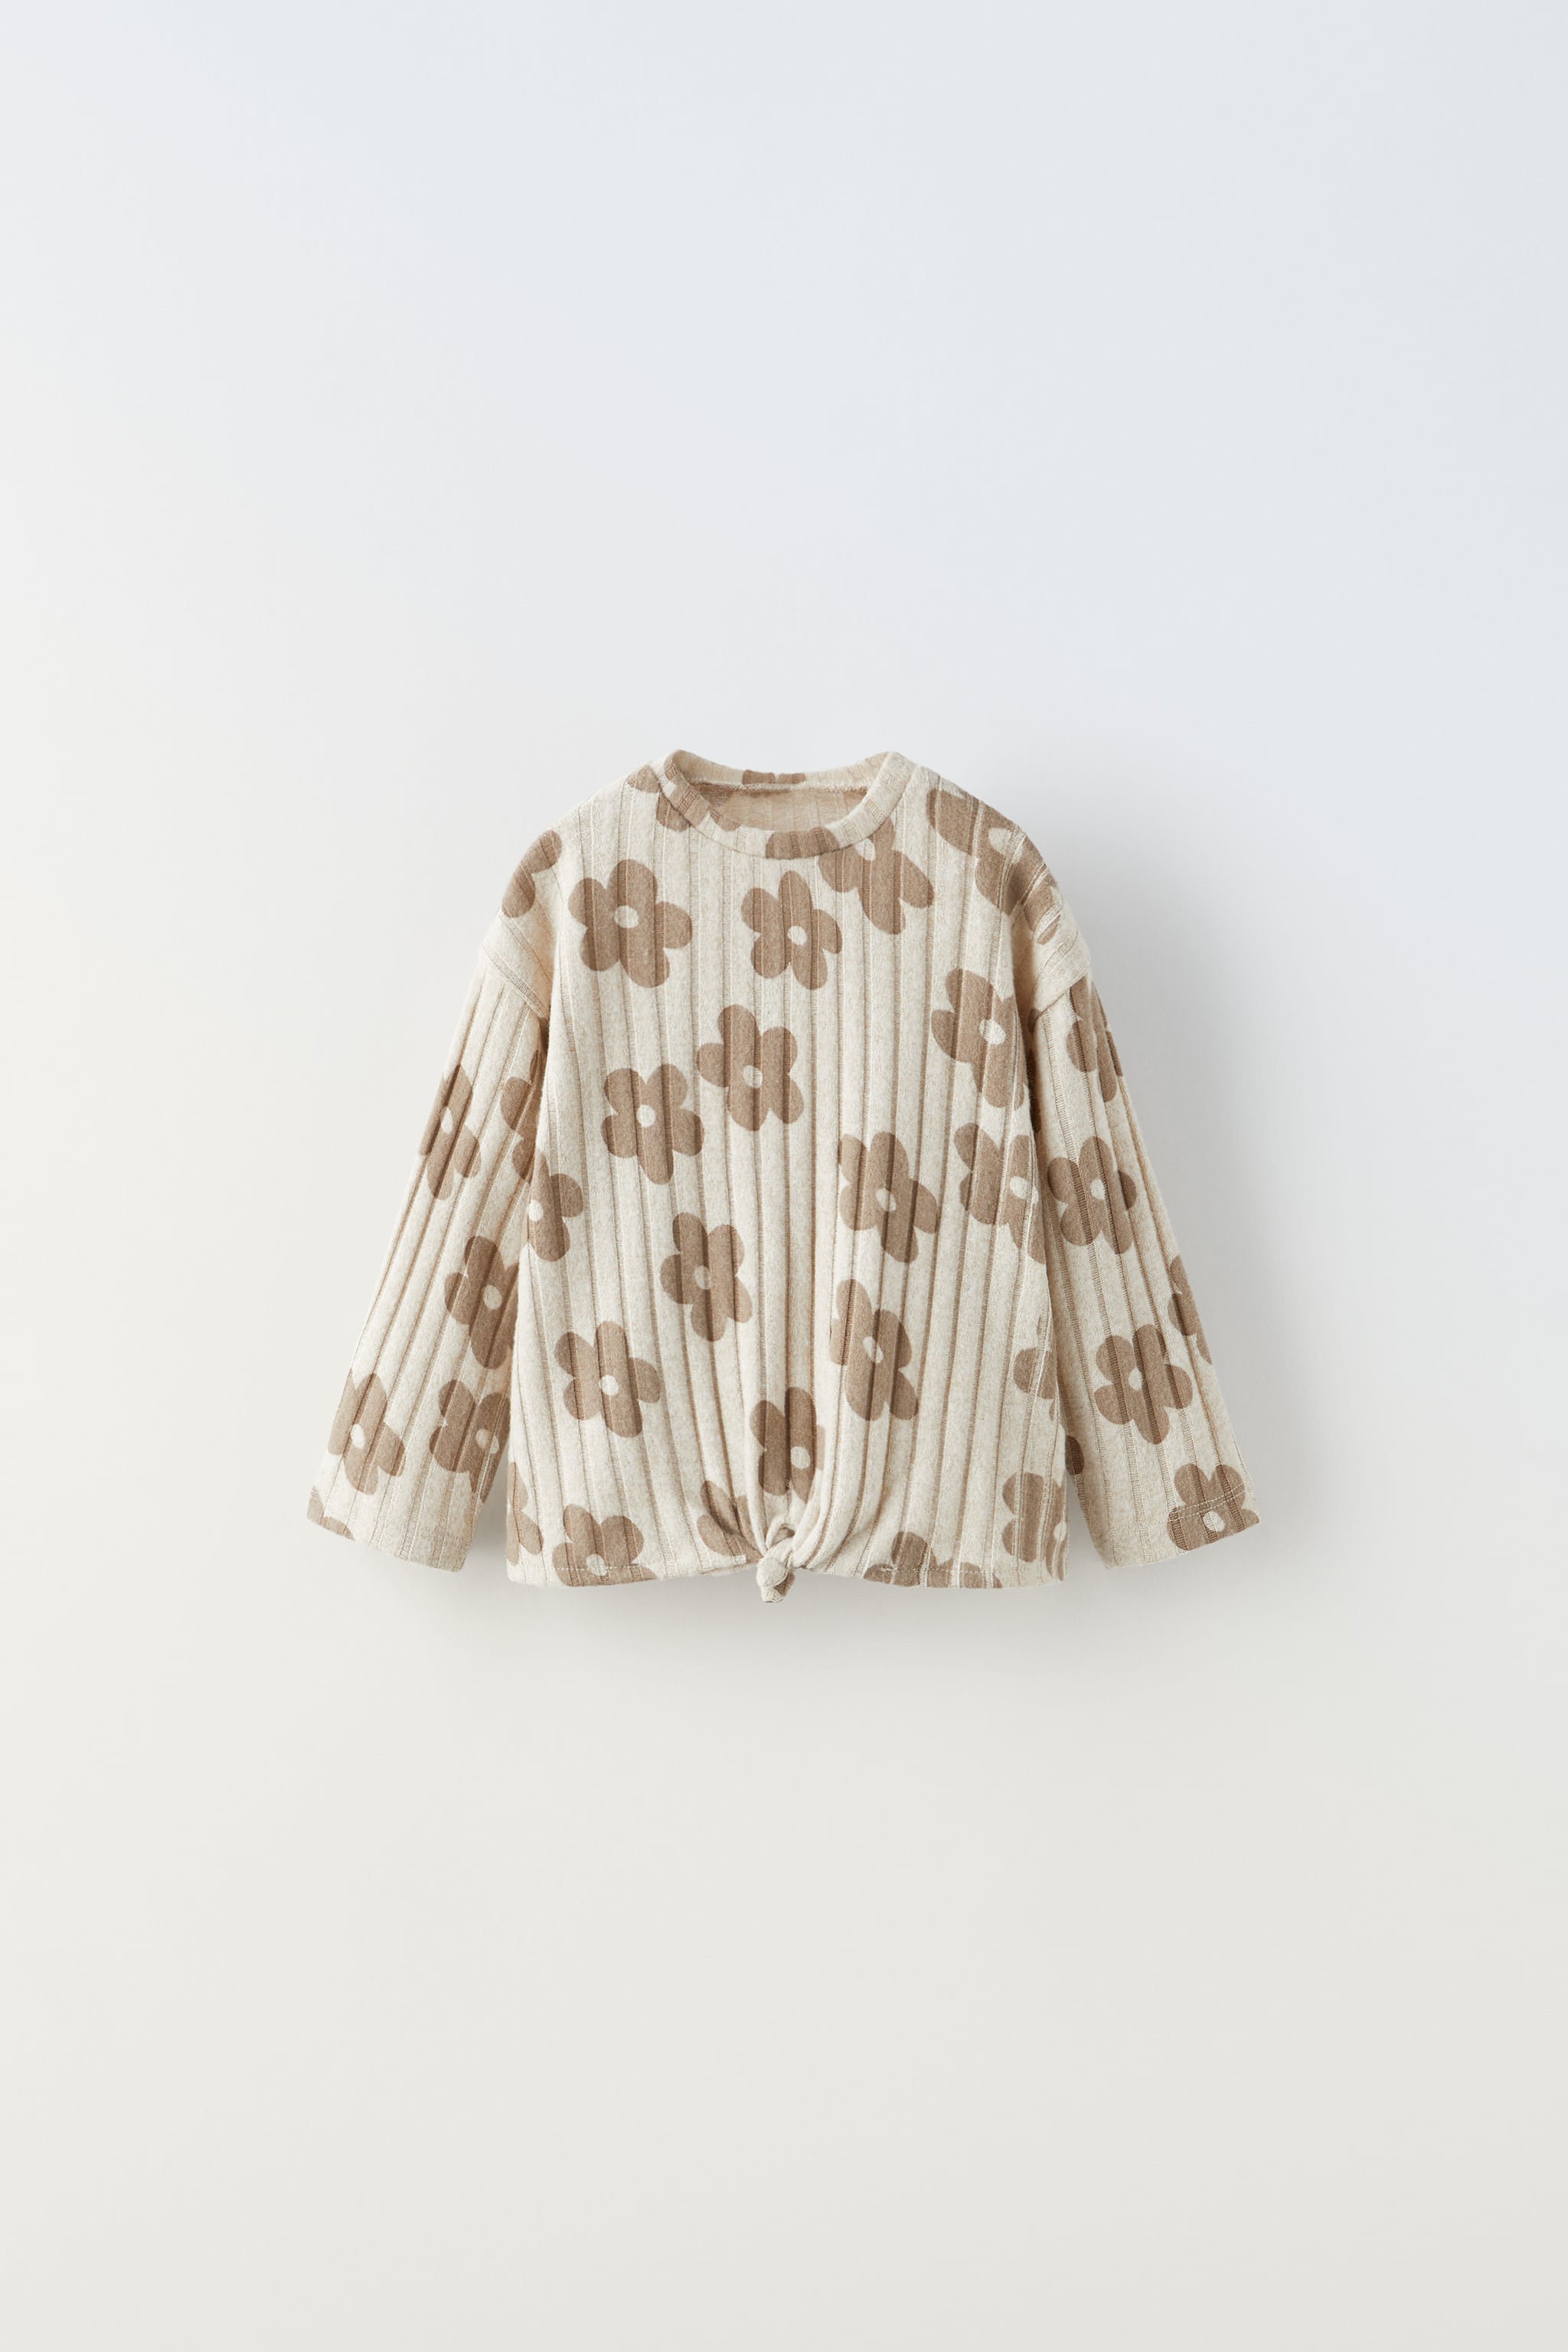 SOFT TOUCH KNOTTED FLORAL TOP